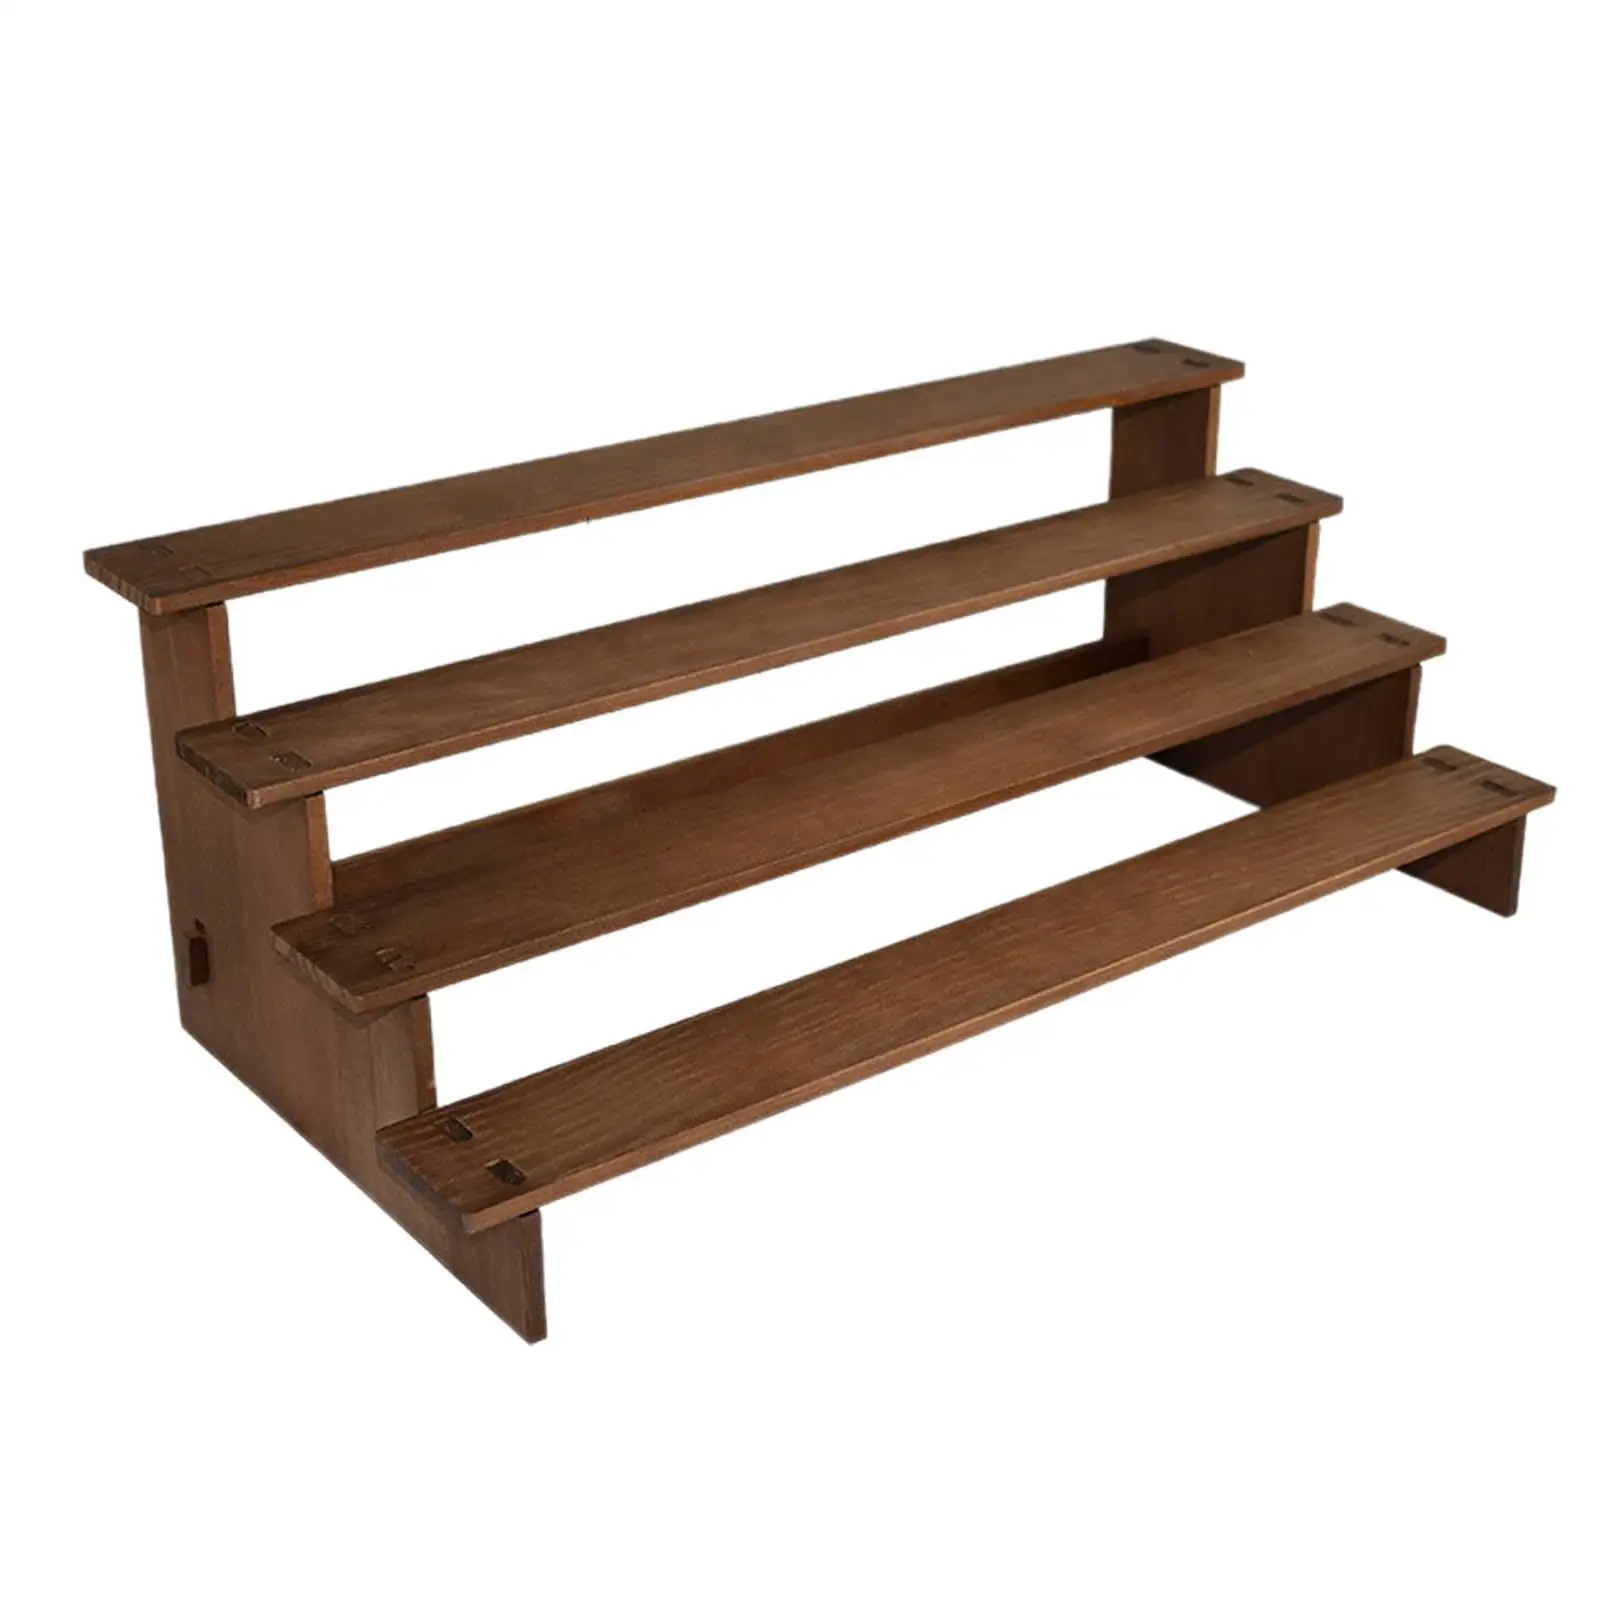 Wooden Display Riser Shelf 4 Tiers Tiered Serving Stand Multifunctional Rustic Spice Rack for Red Wine Bottle Lightweight